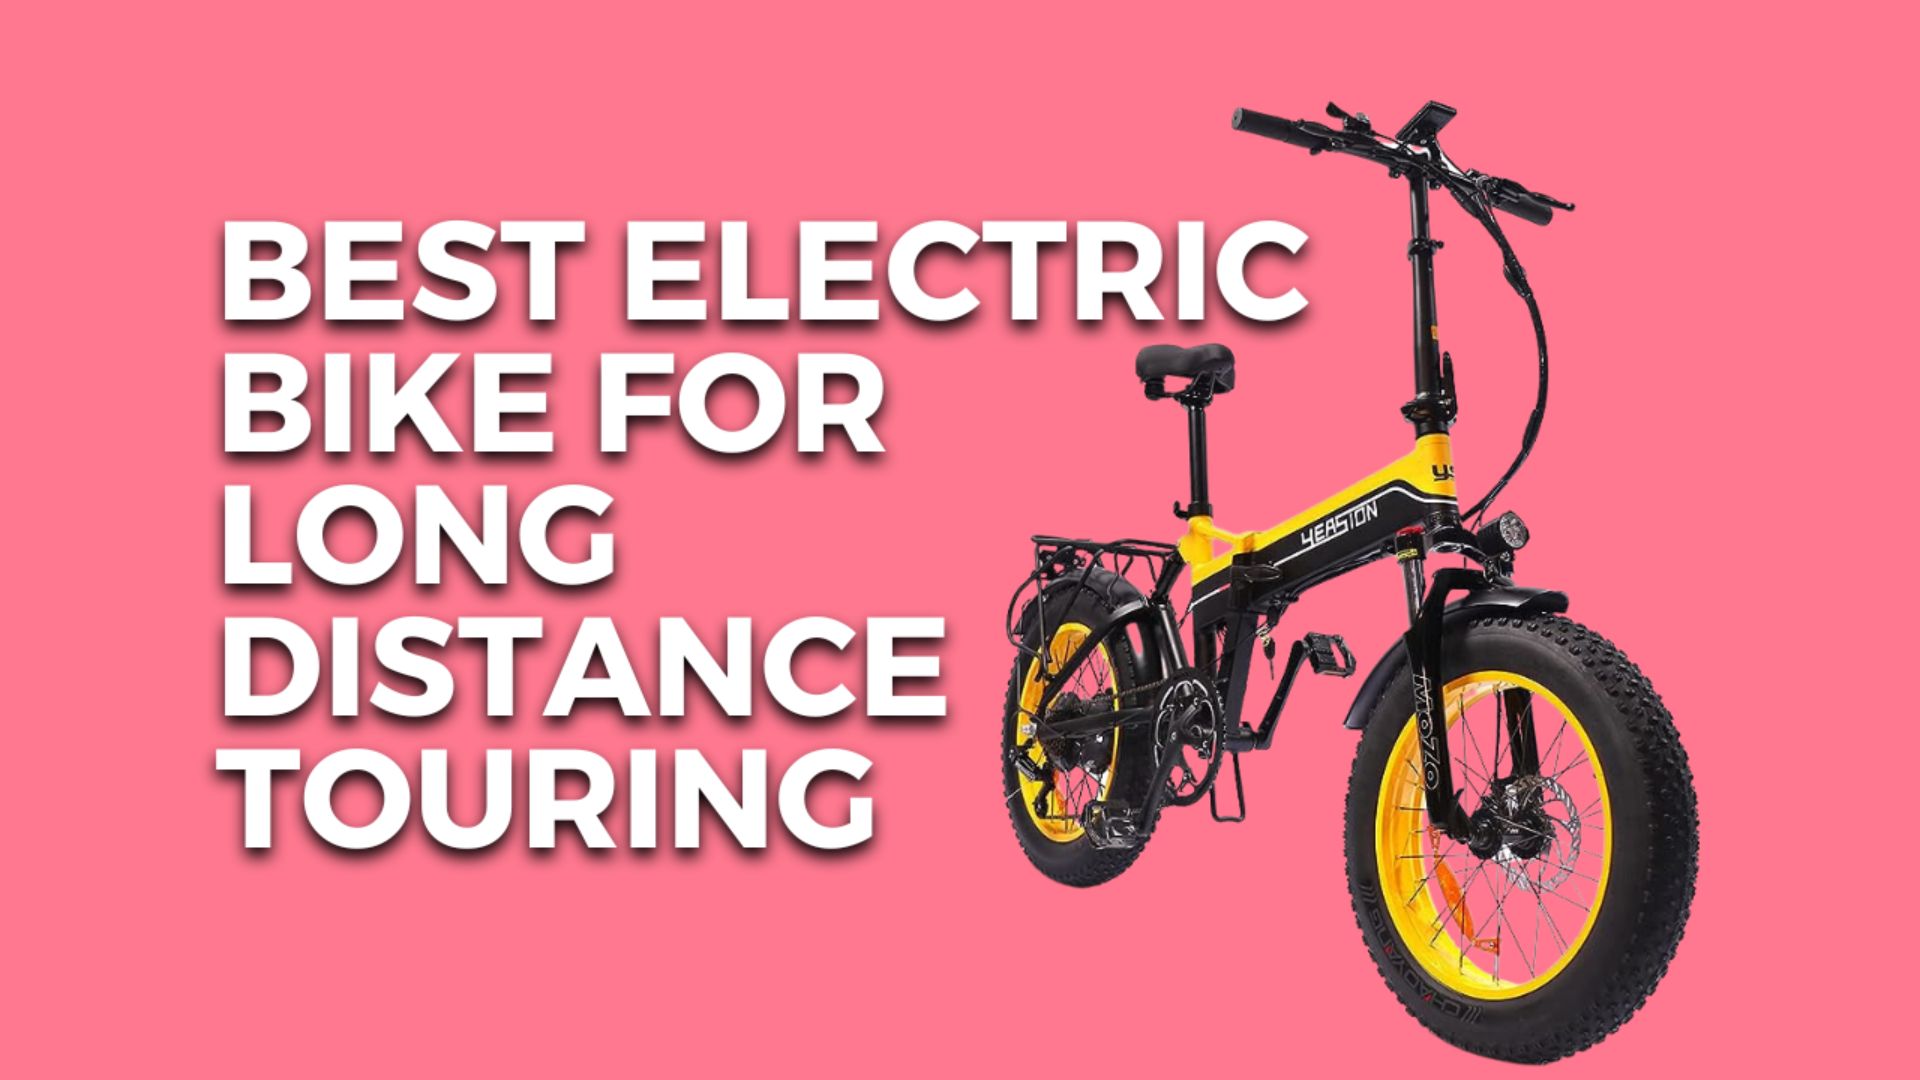 Best Electric Bike For Long Distance Touring